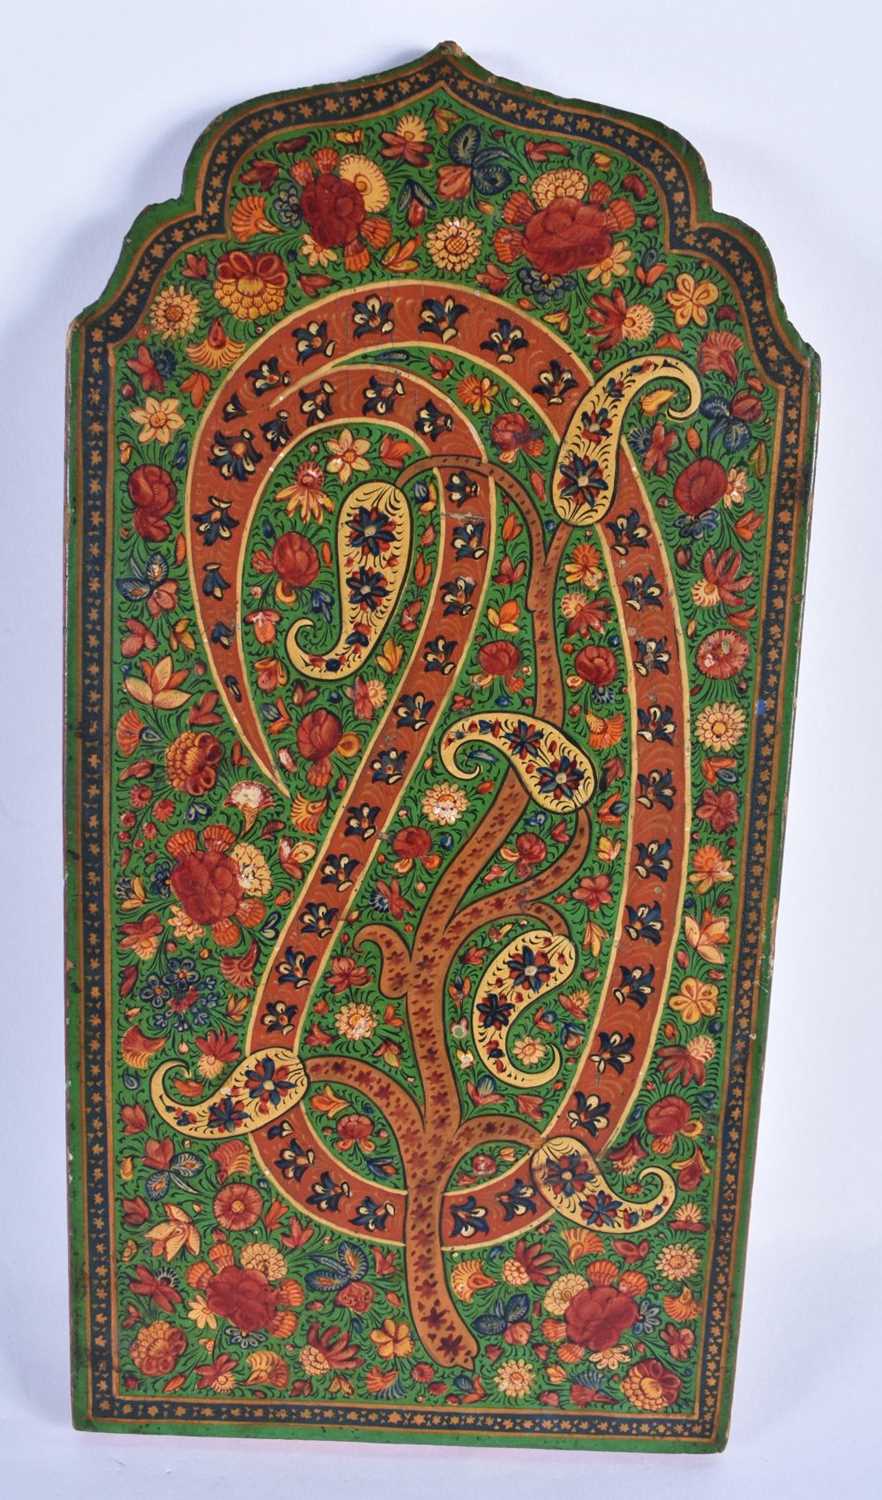 A PAIR OF 19TH CENTURY PERSIAN ISLAMIC PAINTED AND LACQUERED COUNTRY HOUSE WOOD PLAQUES. 30cm x 15 - Image 3 of 4